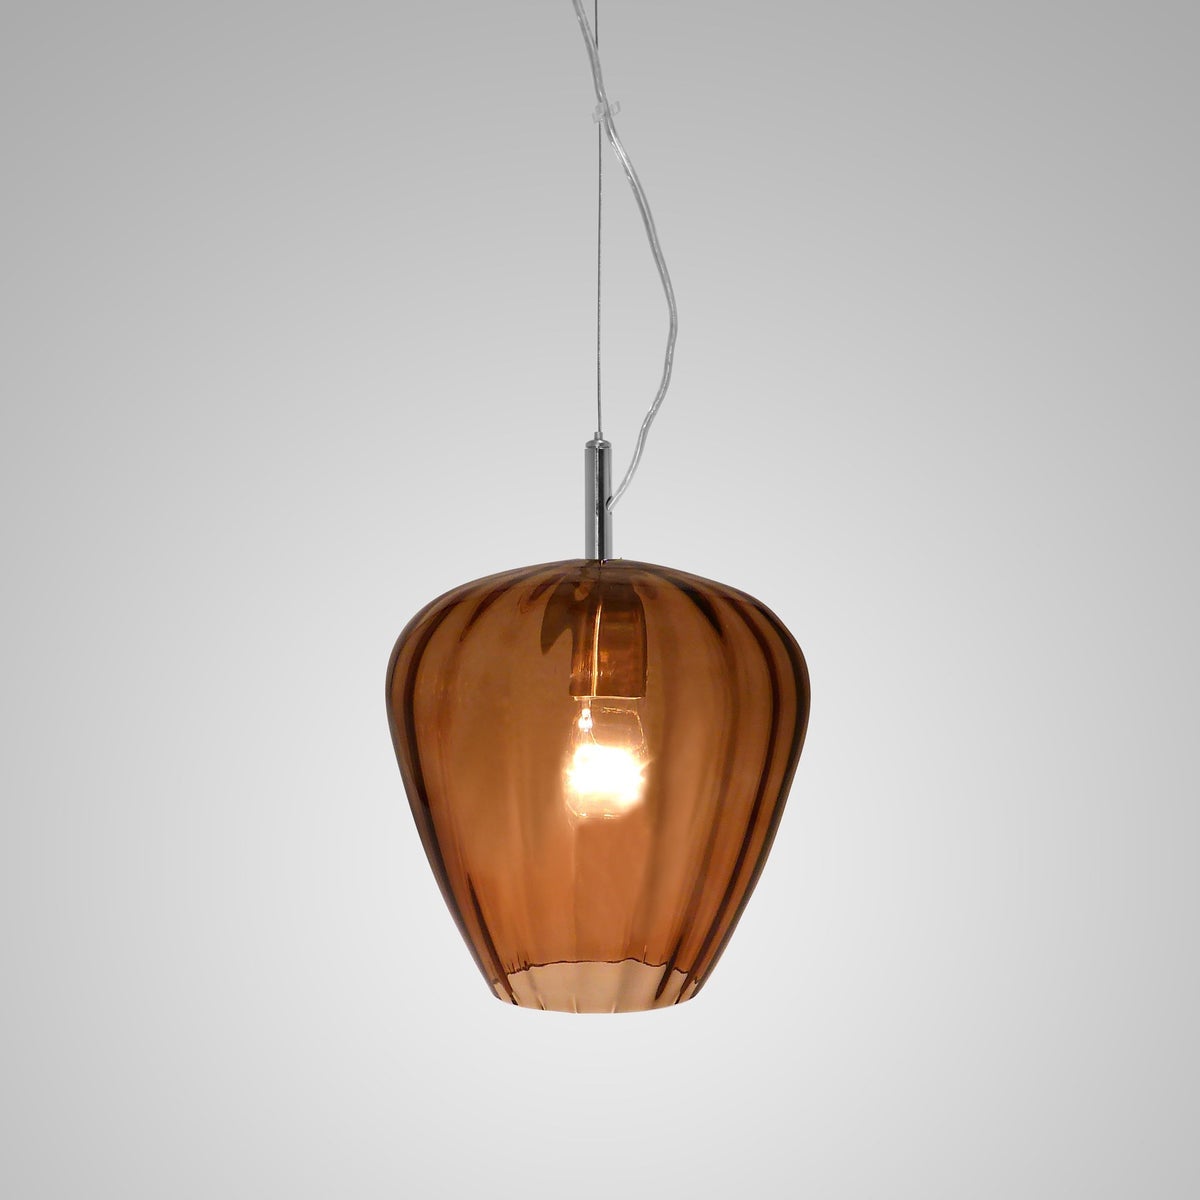 Hermione Pendant (Sm) - Nickel, Brown Lineo Glass